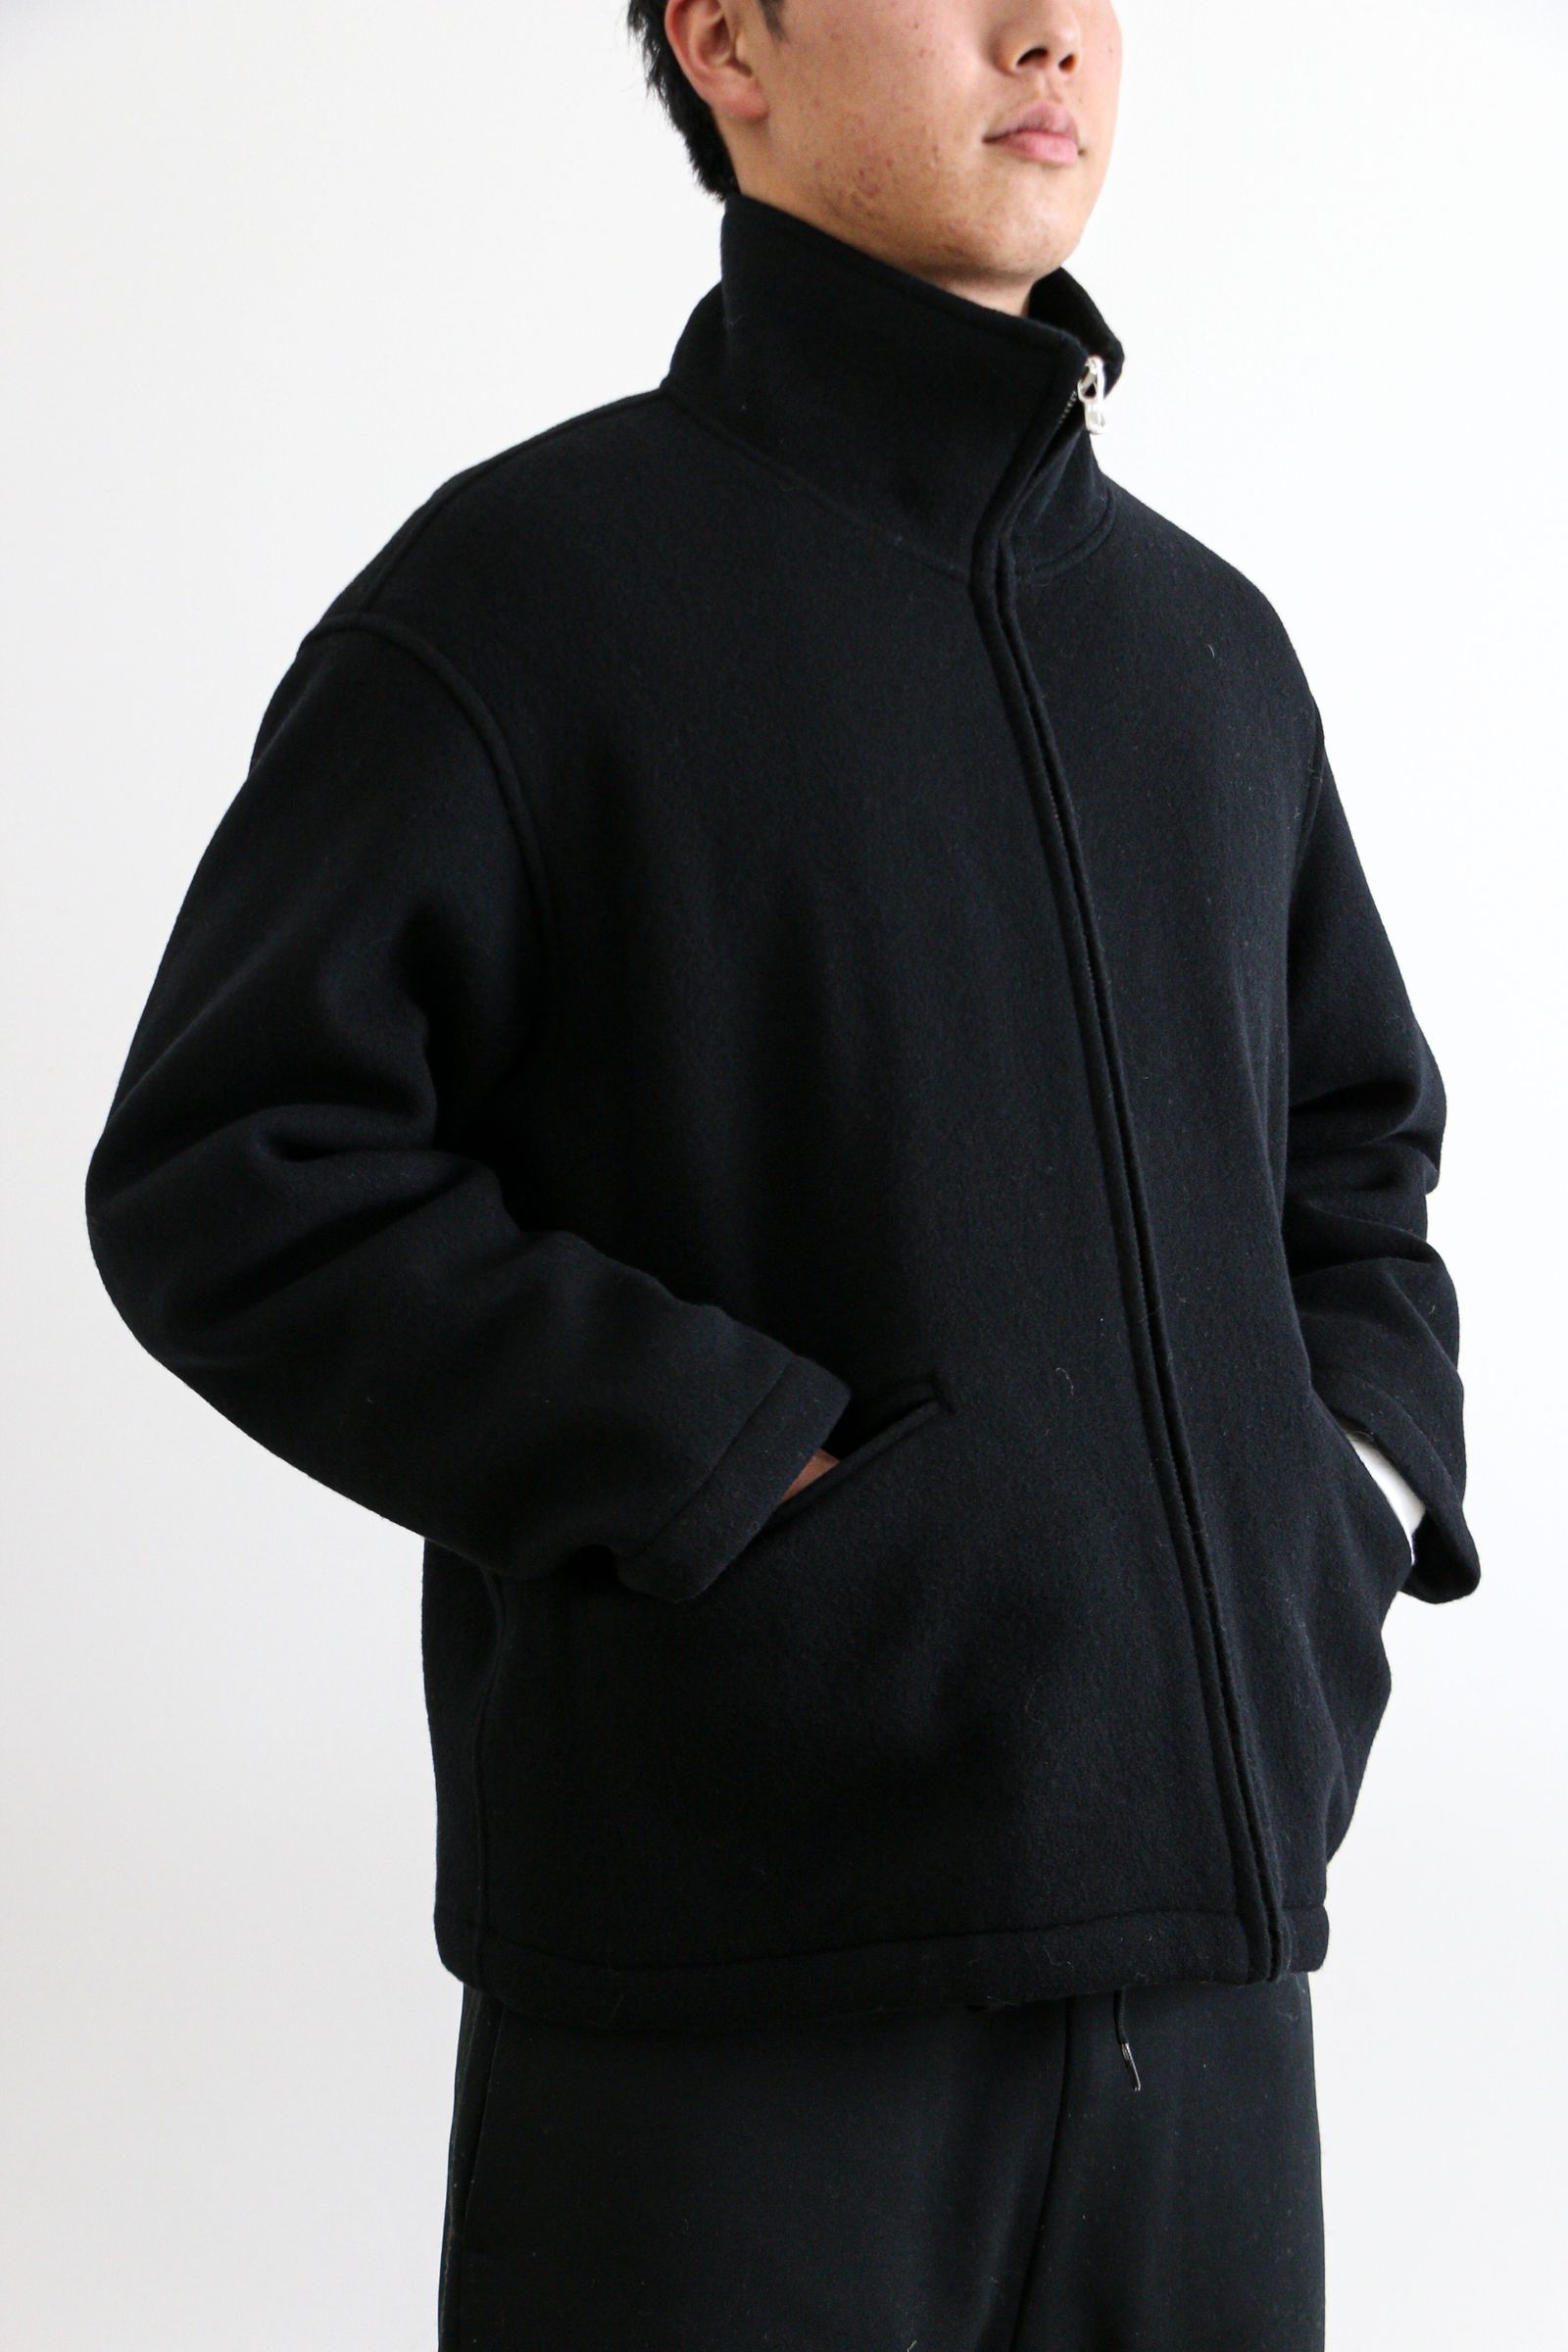 UNIVERSAL PRODUCTS - UNIVERSAL PRODUCTS Insulation Zip Blouson 